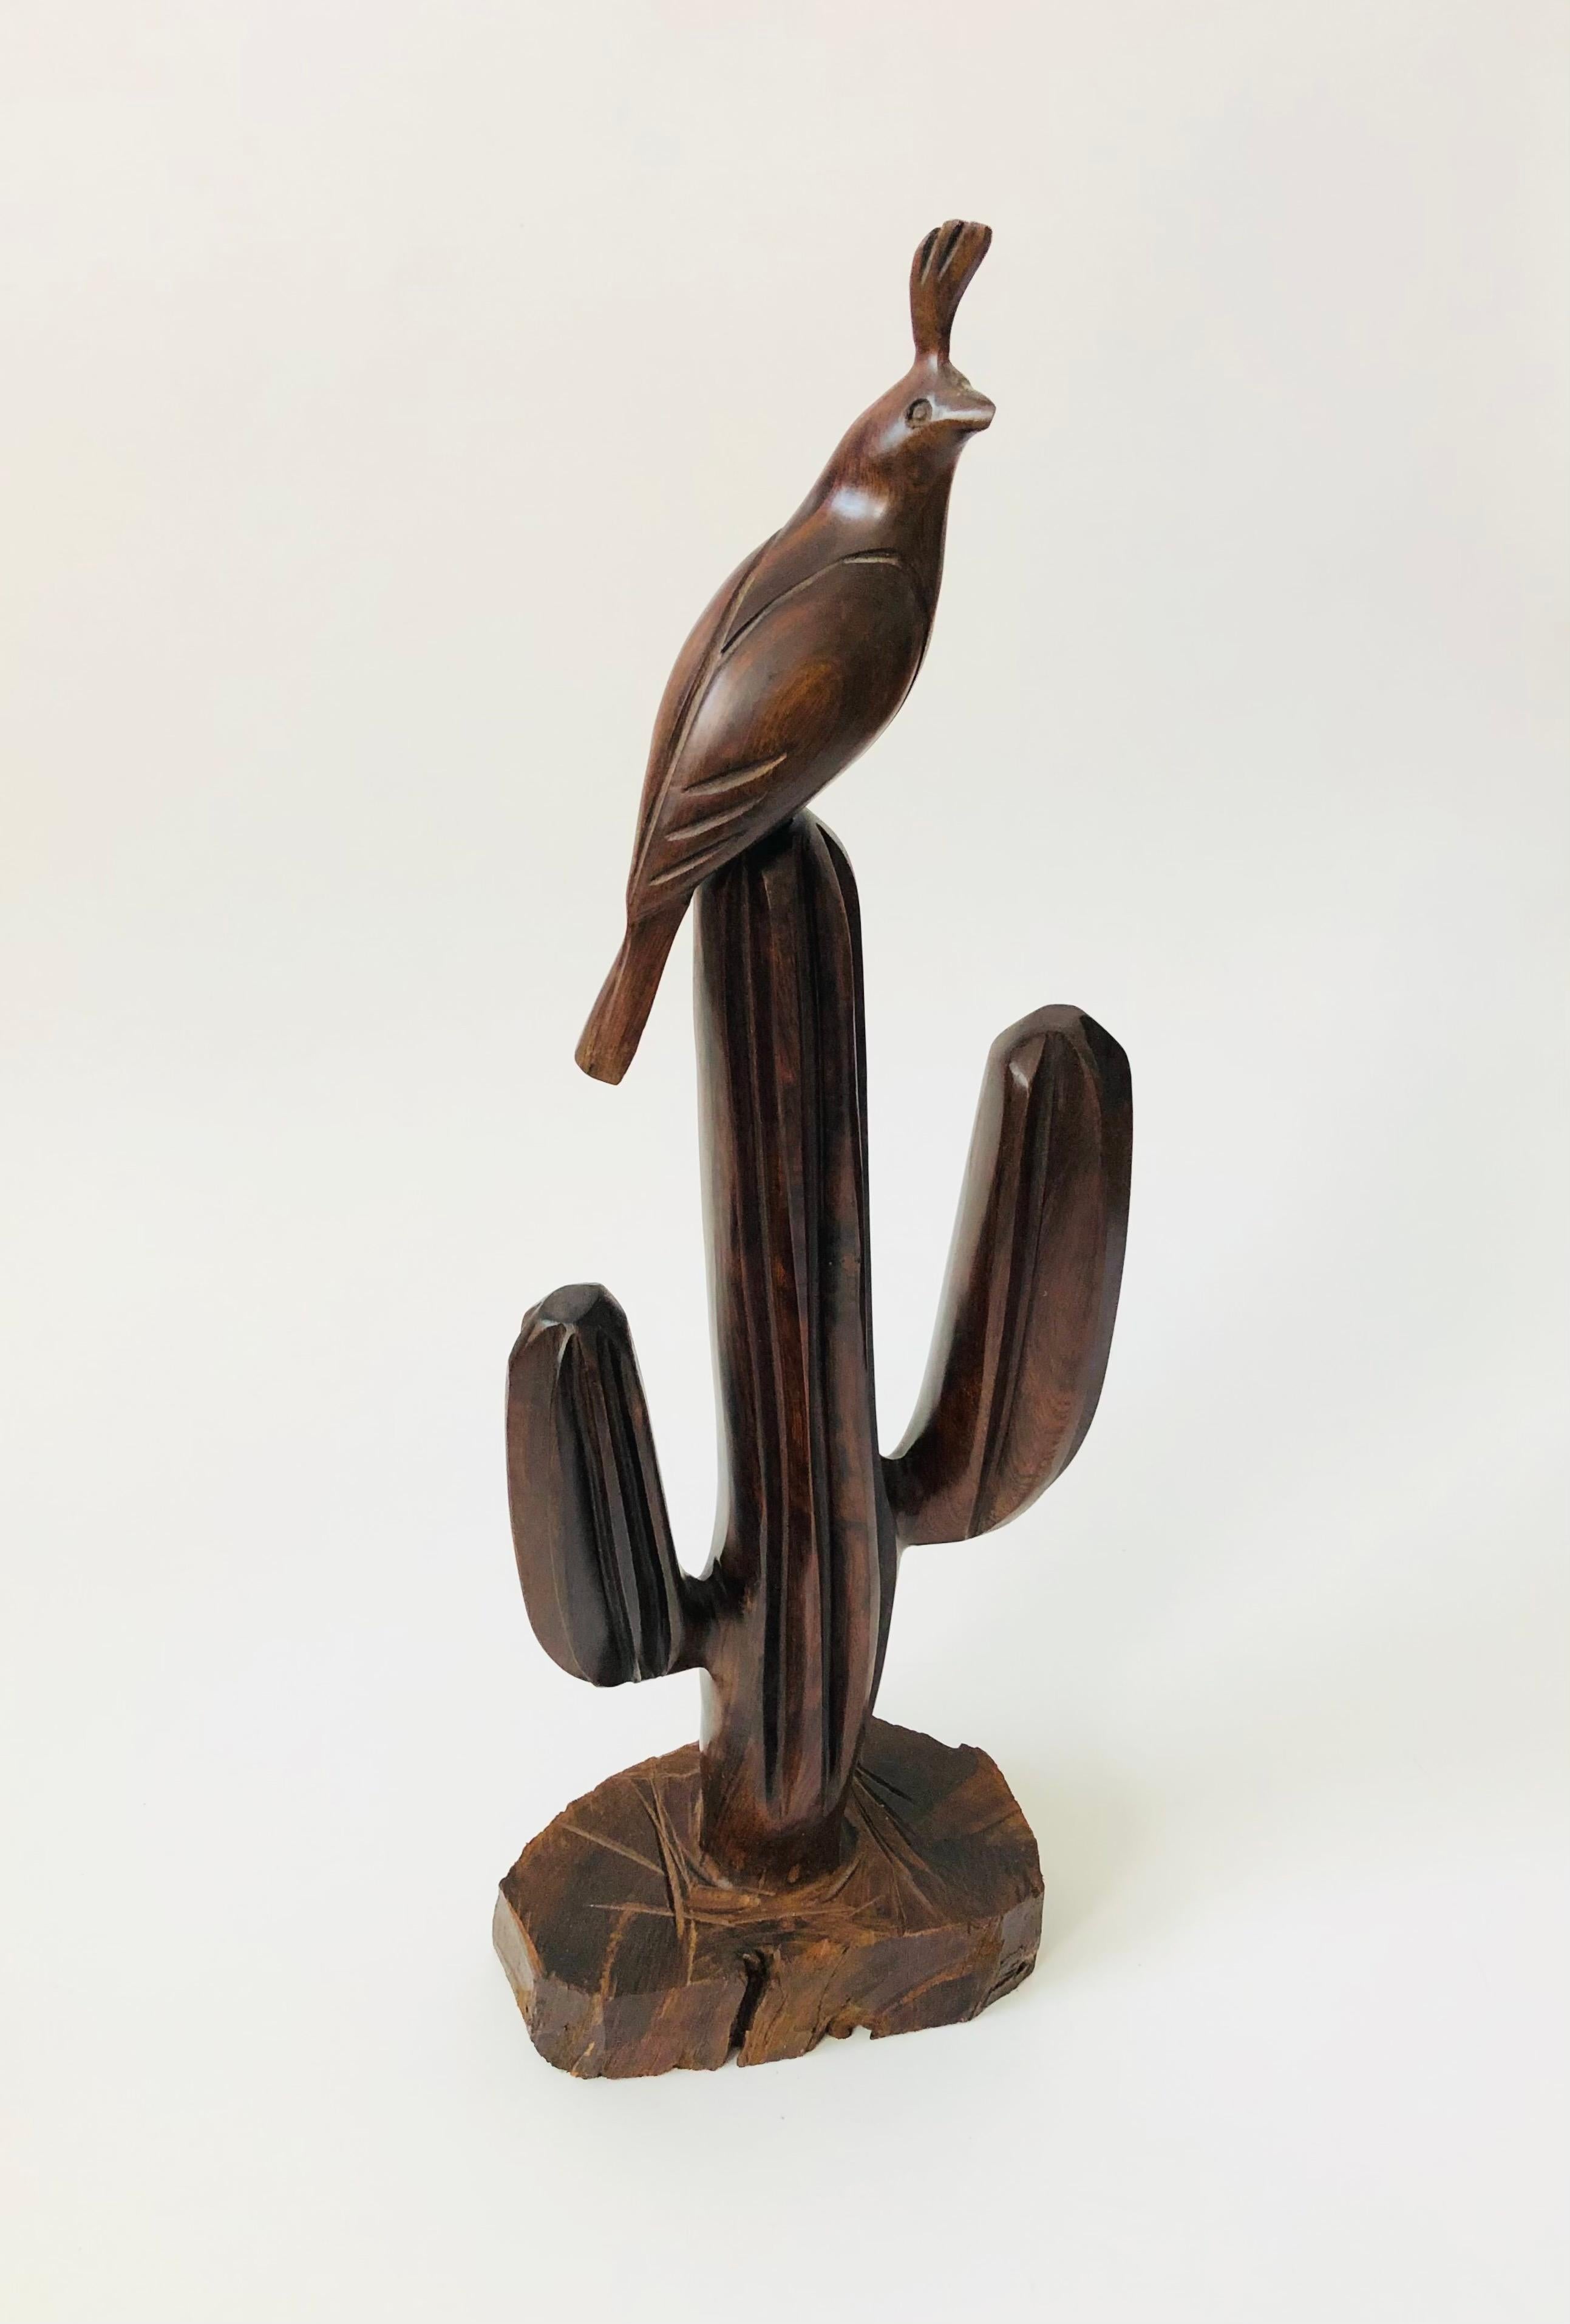 A vintage extra large carved ironwood statue in the shape of a saguaro cactus. The cactus has been carved and polished smooth with a rough natural wood base. A sweet little carved ironwood quail is perched on top of the cactus. Lovely dark natural